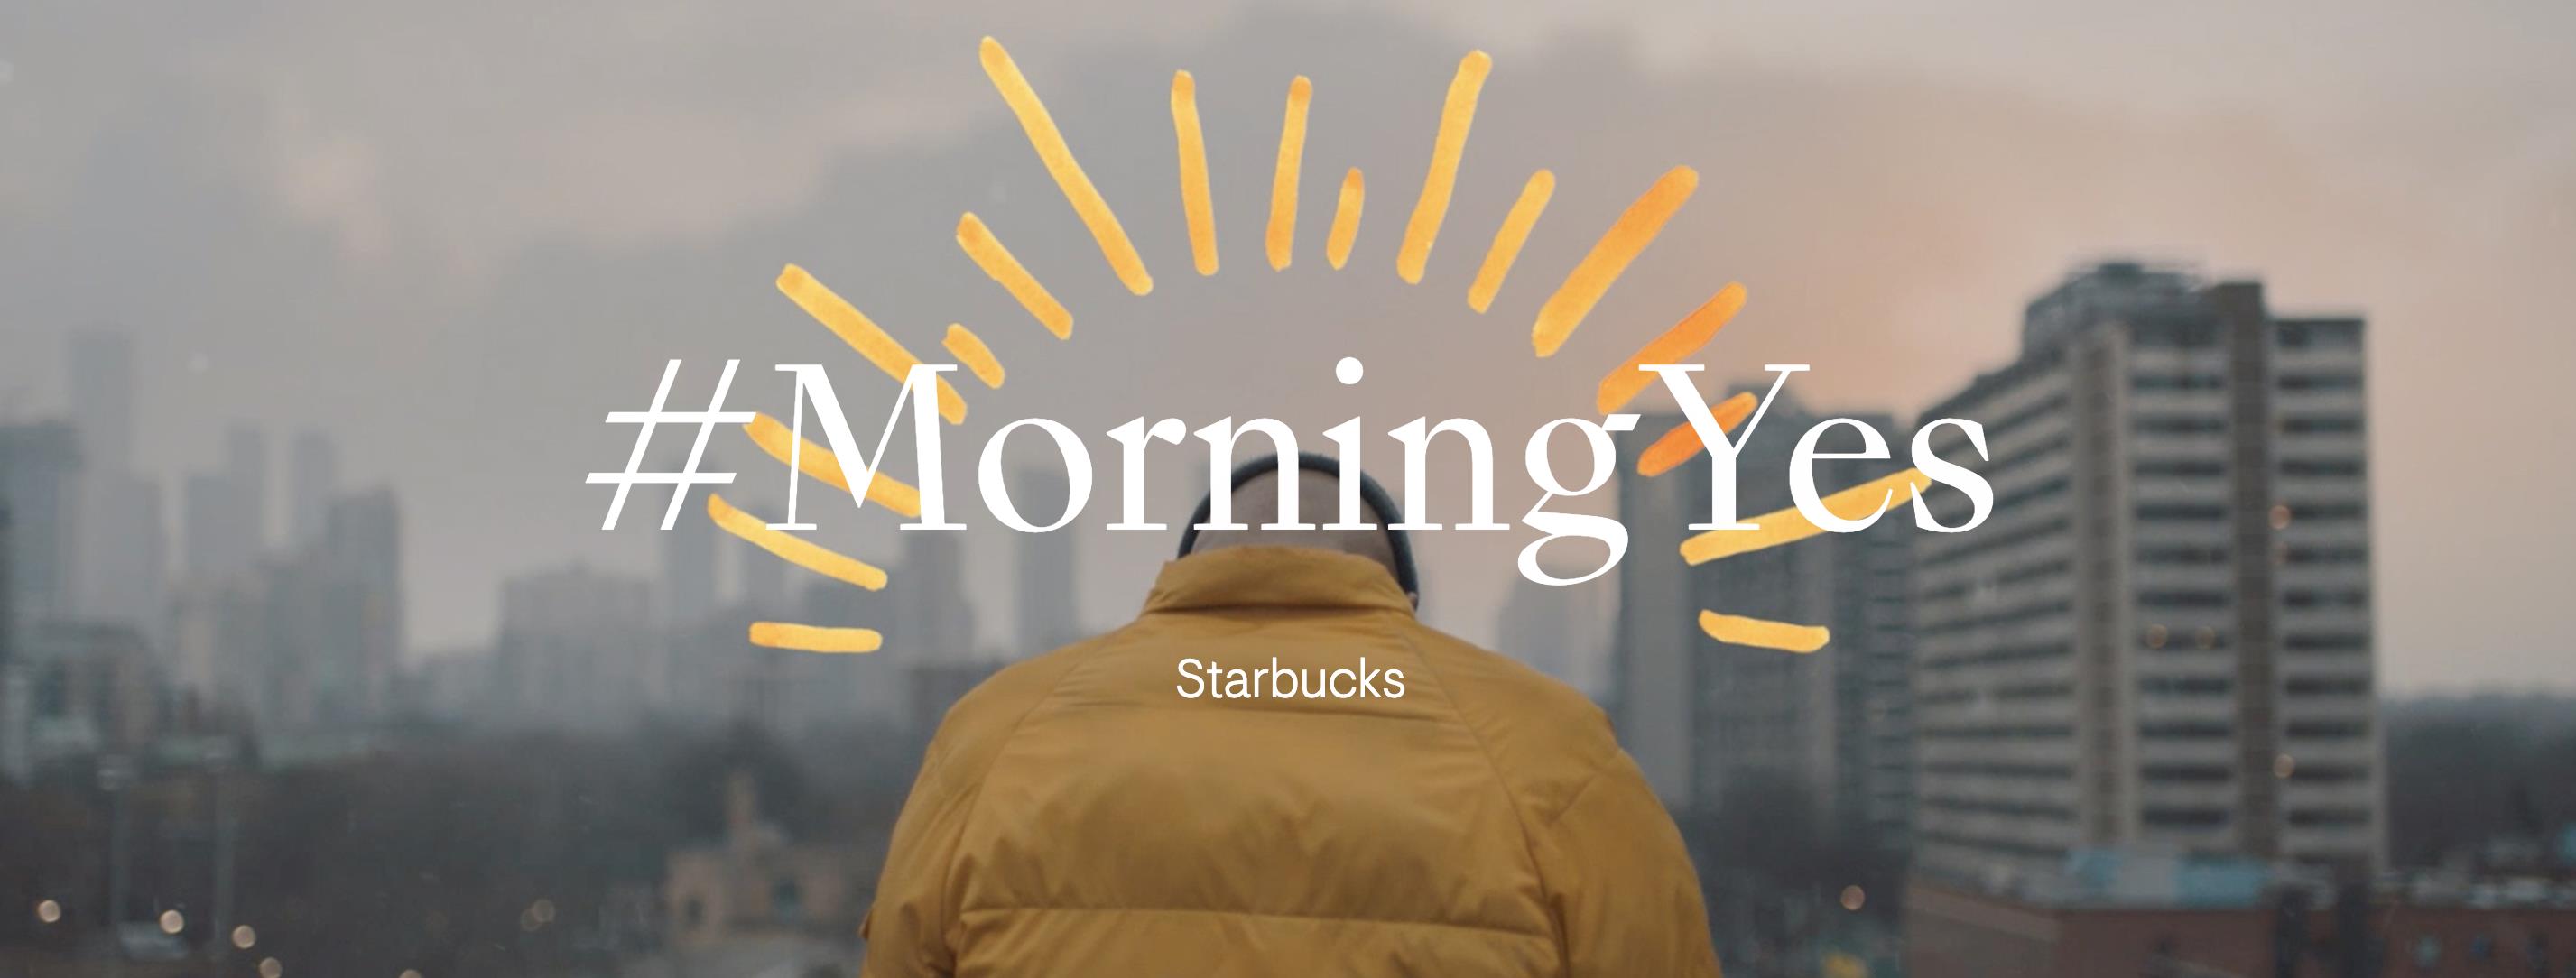 Starbucks "Morning Yes" Campaign